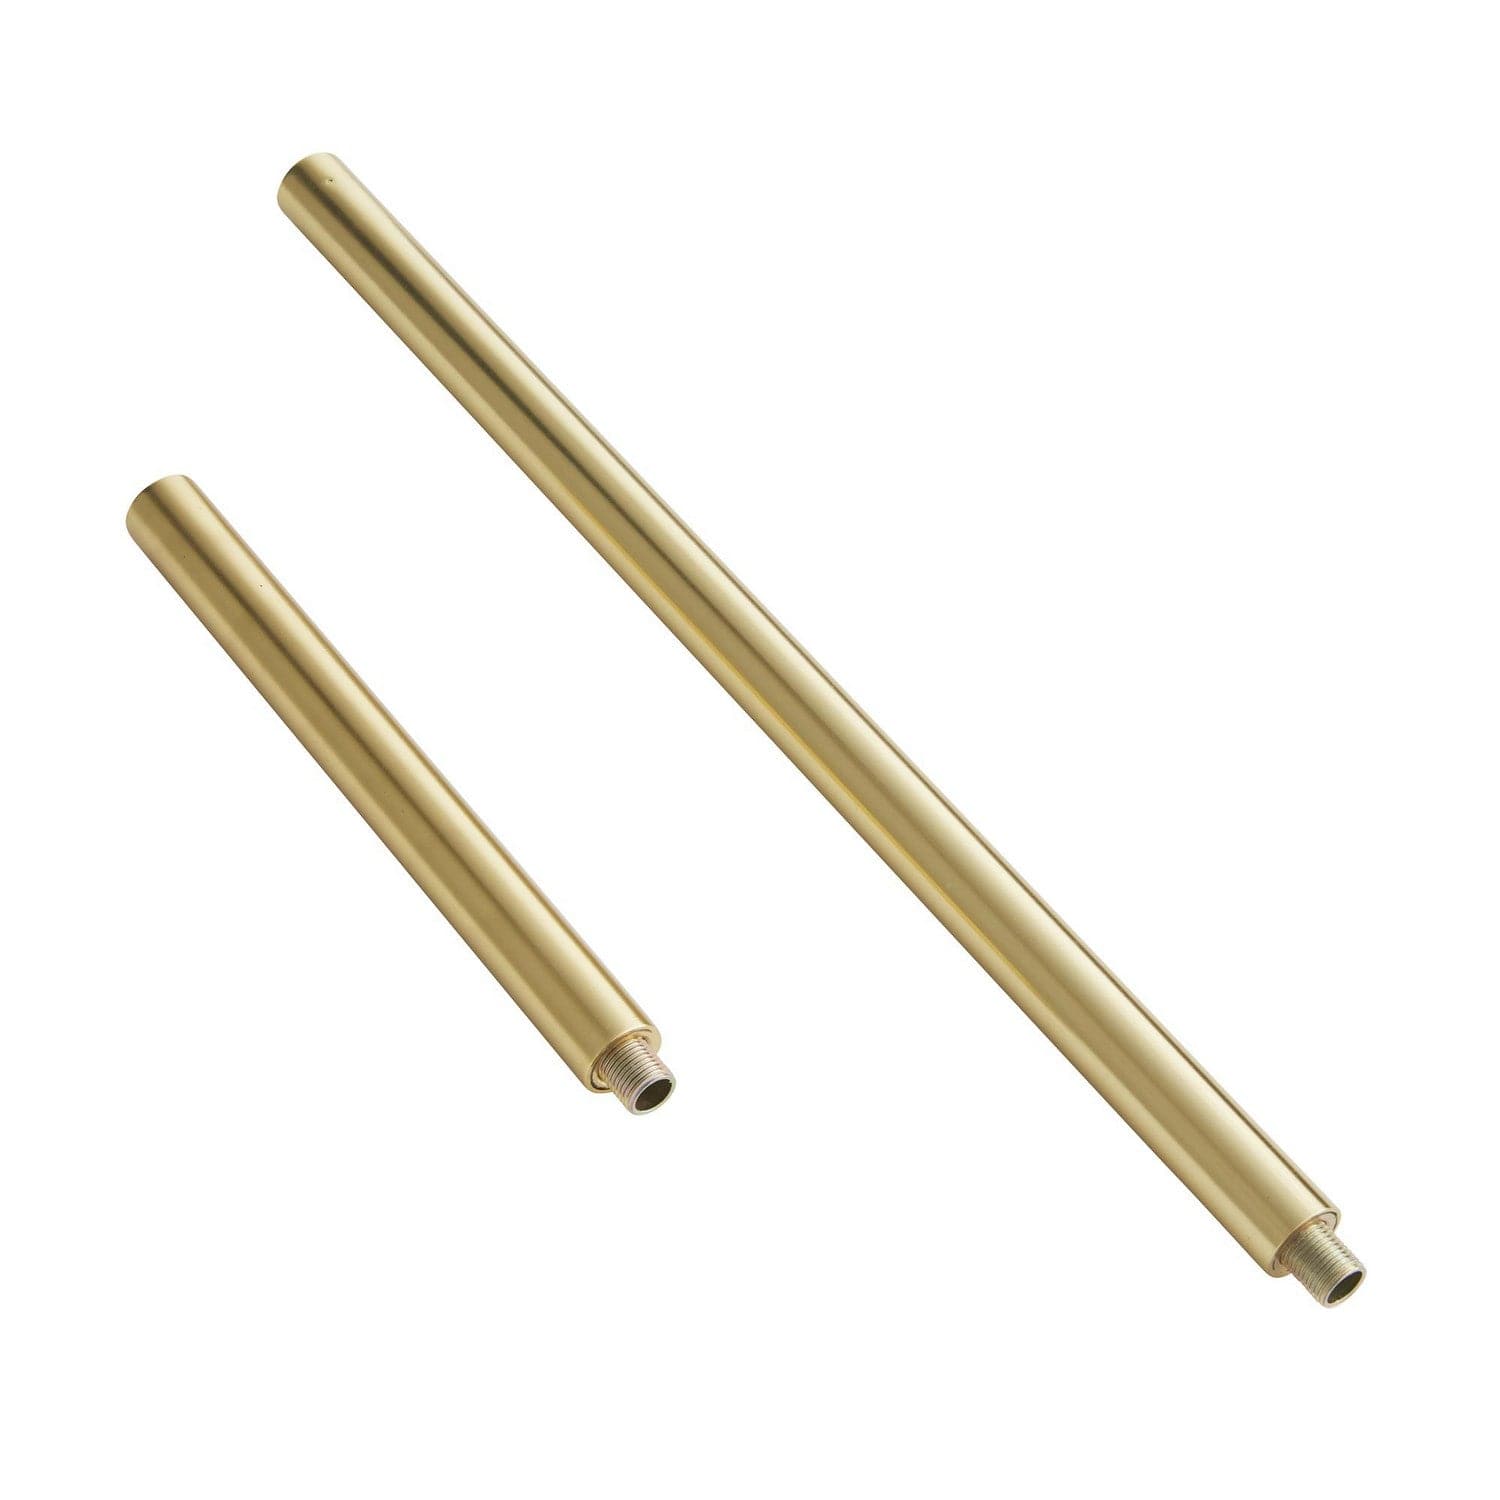 Arteriors - PIPE-146 - Extension Pipe - Pipe - Natural Brass